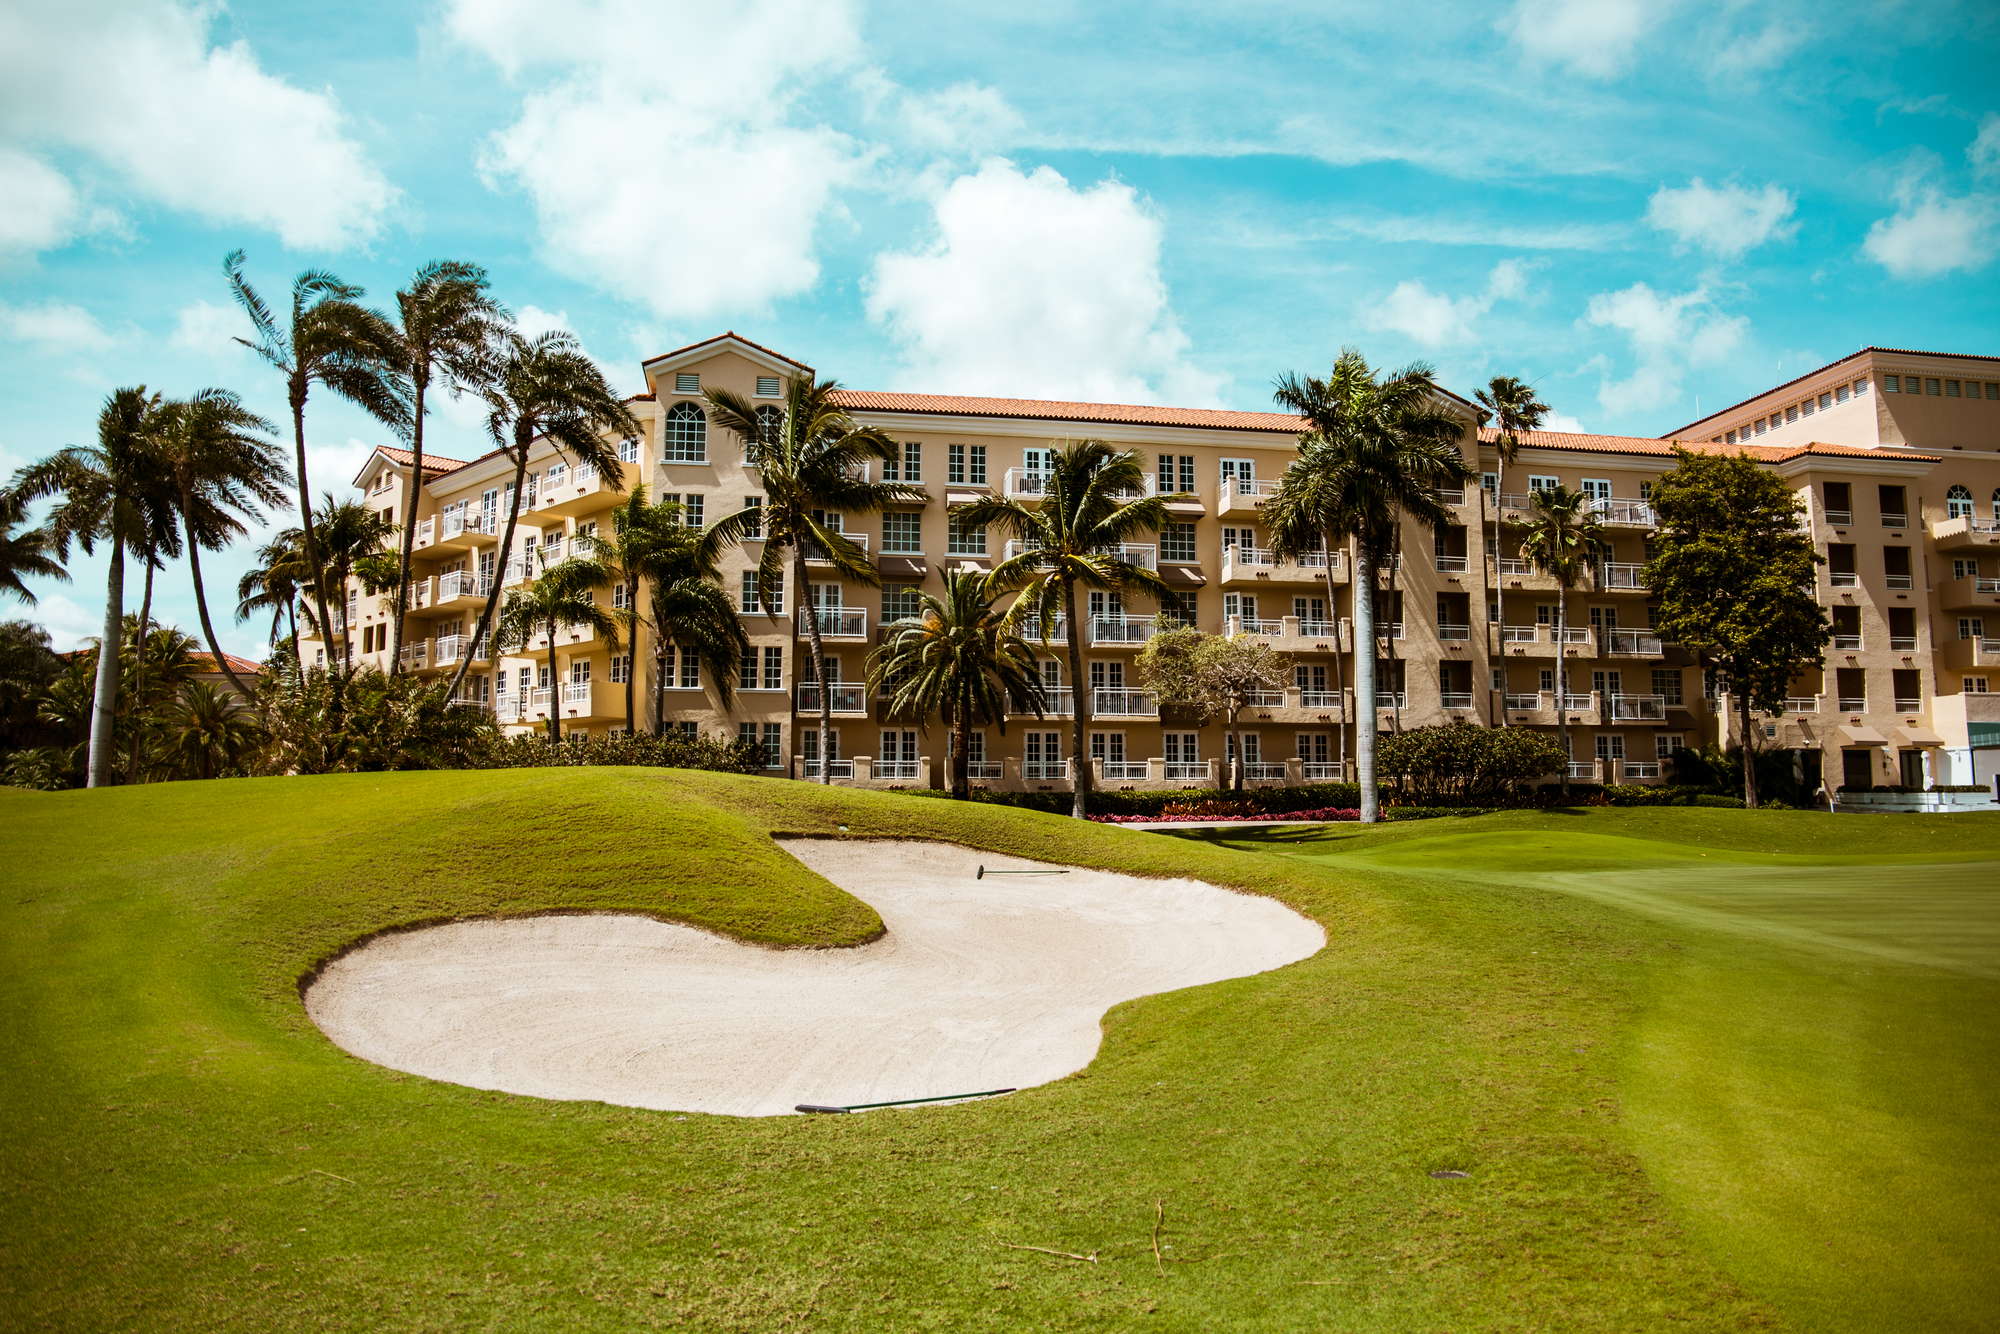 Turnberry Isle Miami Expert Review | Fodor's Travel